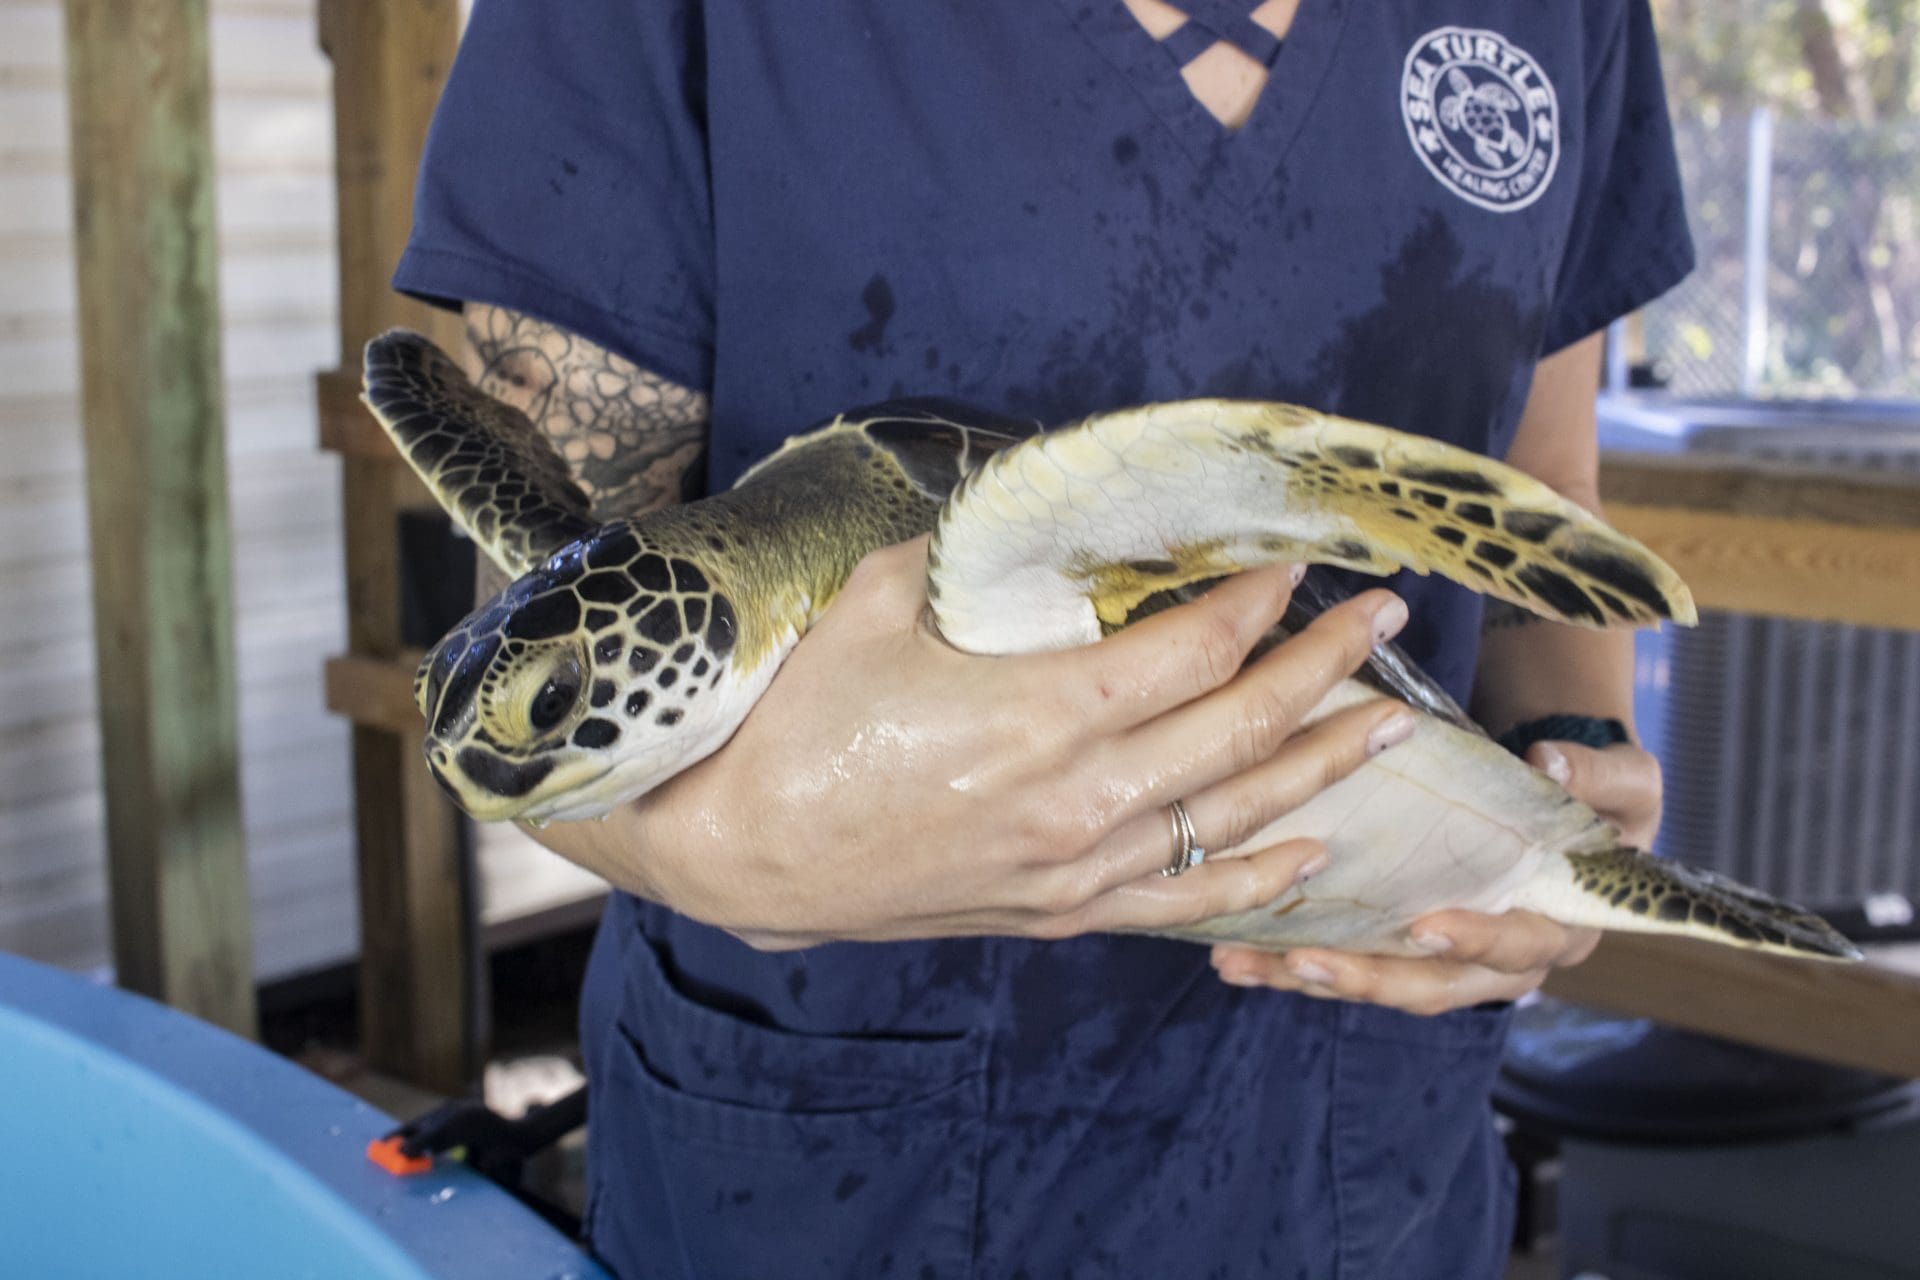 Over 200 Baby Sea Turtles at Sea Turtle Healing Center at Brevard Zoo